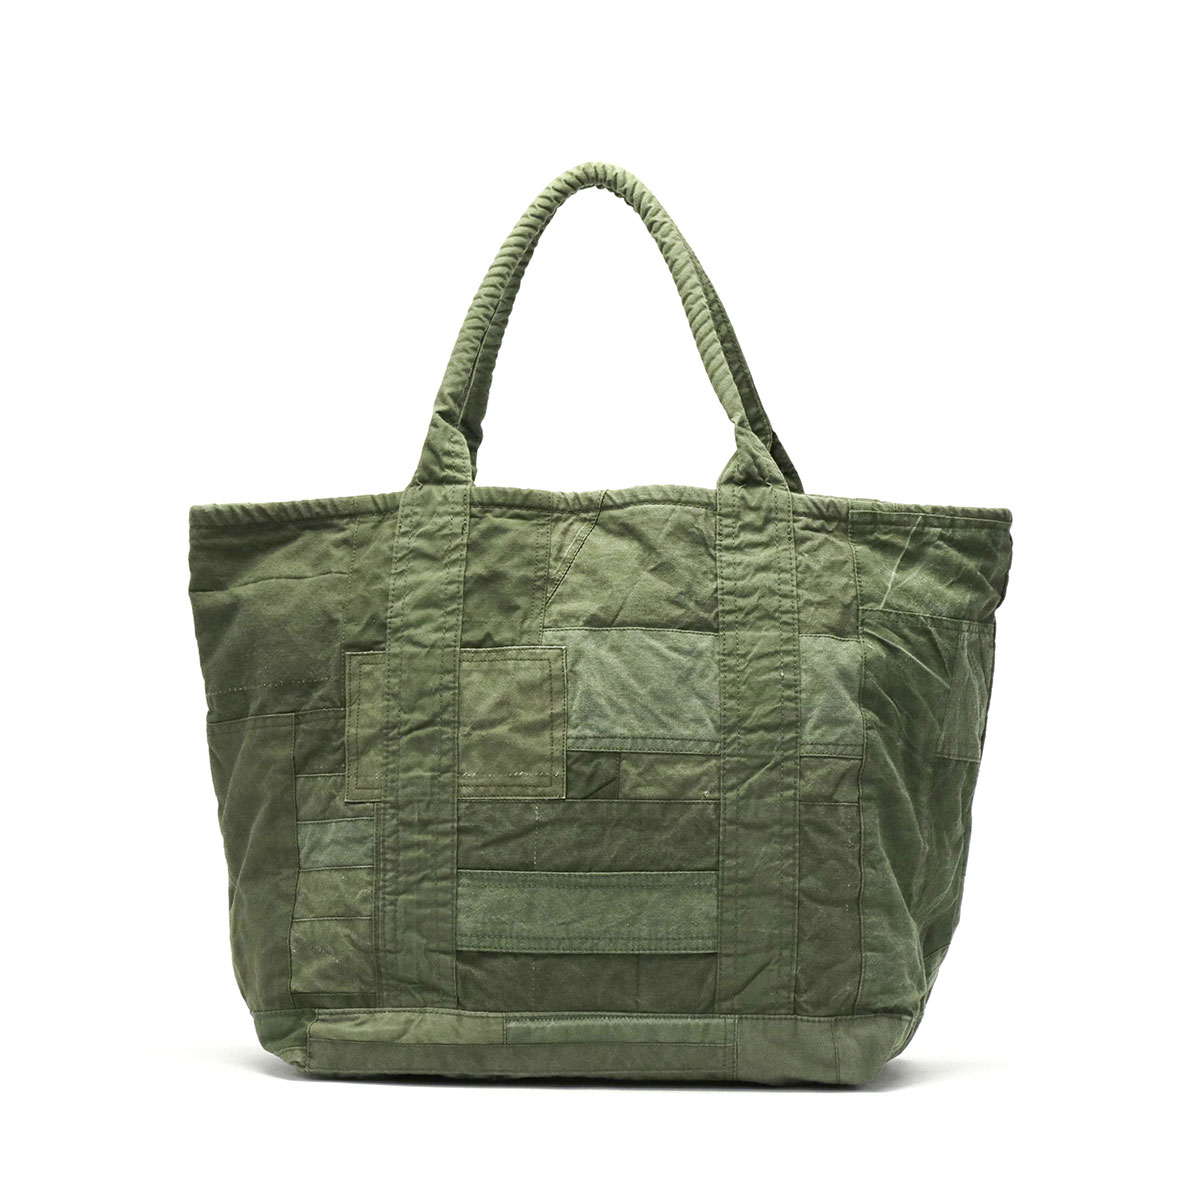 hobo ホーボー CARRY-ALL TOTE L UPCYCLED US ARMY CLOTH 29L HB 